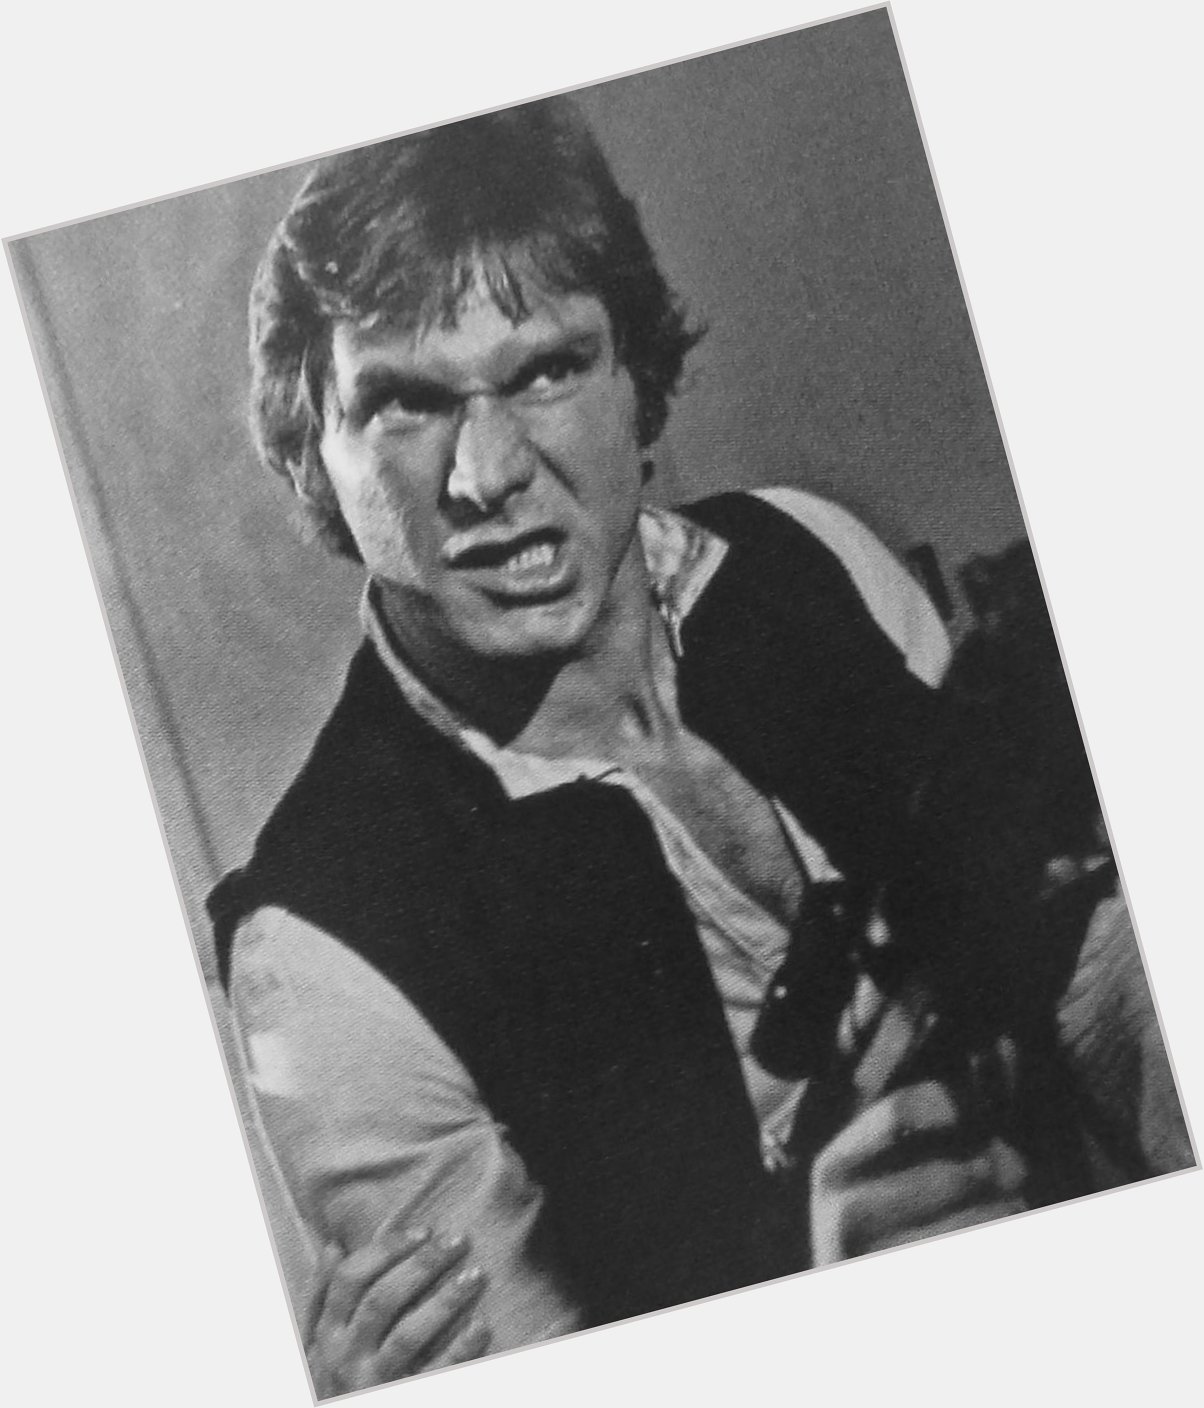 Happy 73rd Birthday to the man, the myth, the legend, the scar
HARRISON FORD! 